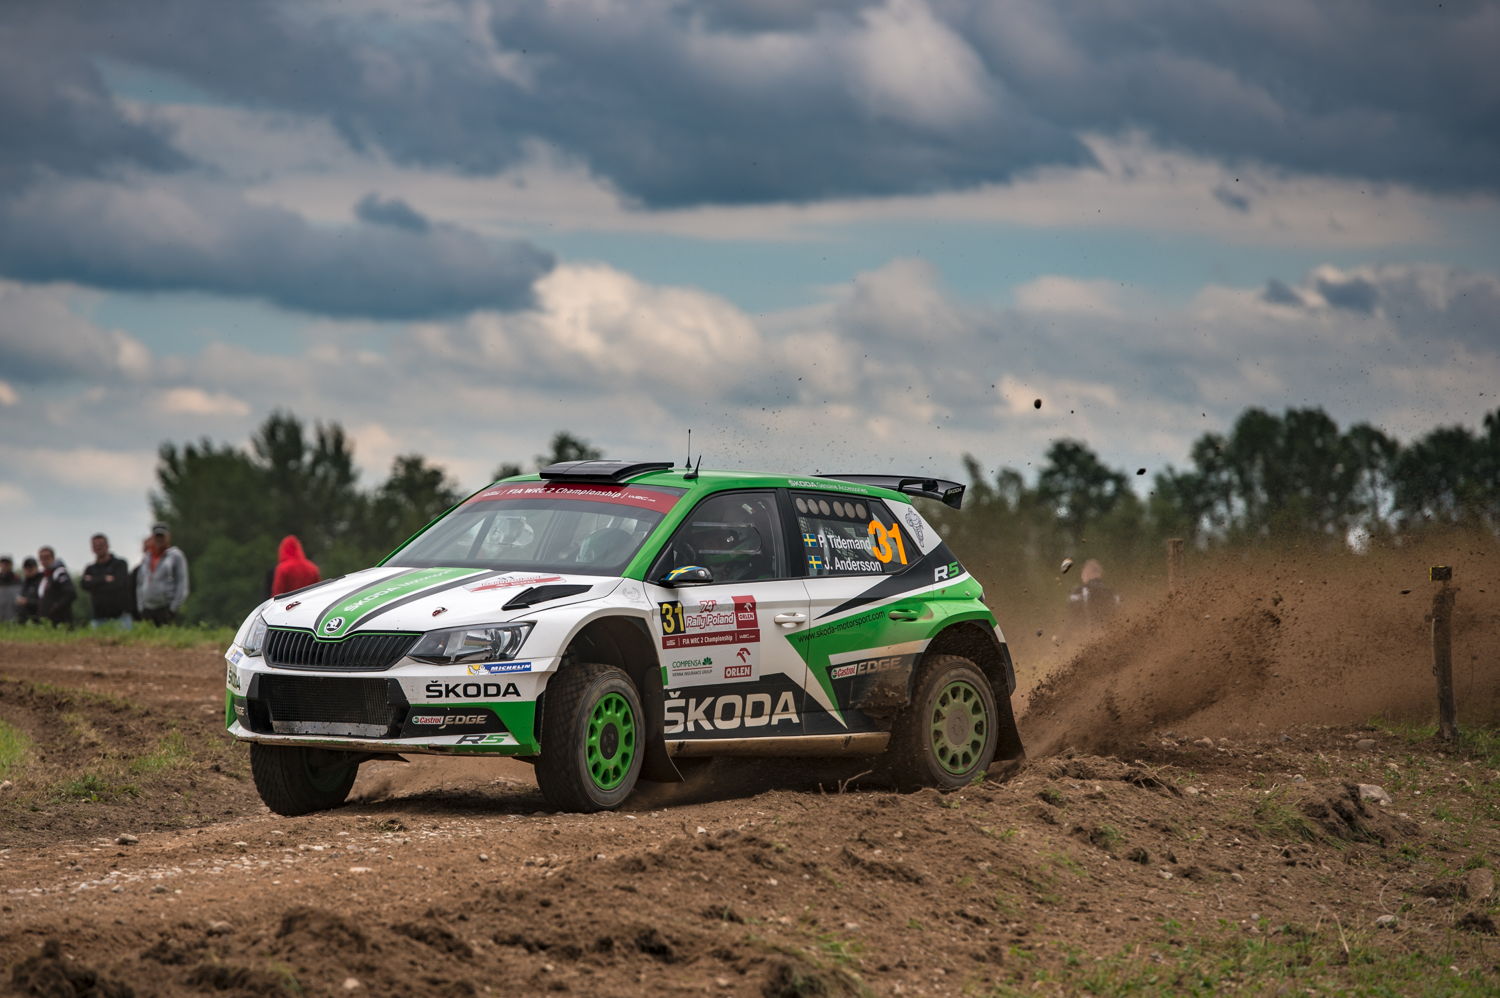 Pontus Tidemand and co-driver Jonas Andersson (ŠKODA FABIA R5) extended their lead in the WRC 2 category after finishing second at the Rally Poland behind ŠKODA stablemates Ole Christian Veiby / Stig Rune Skjaermoen.